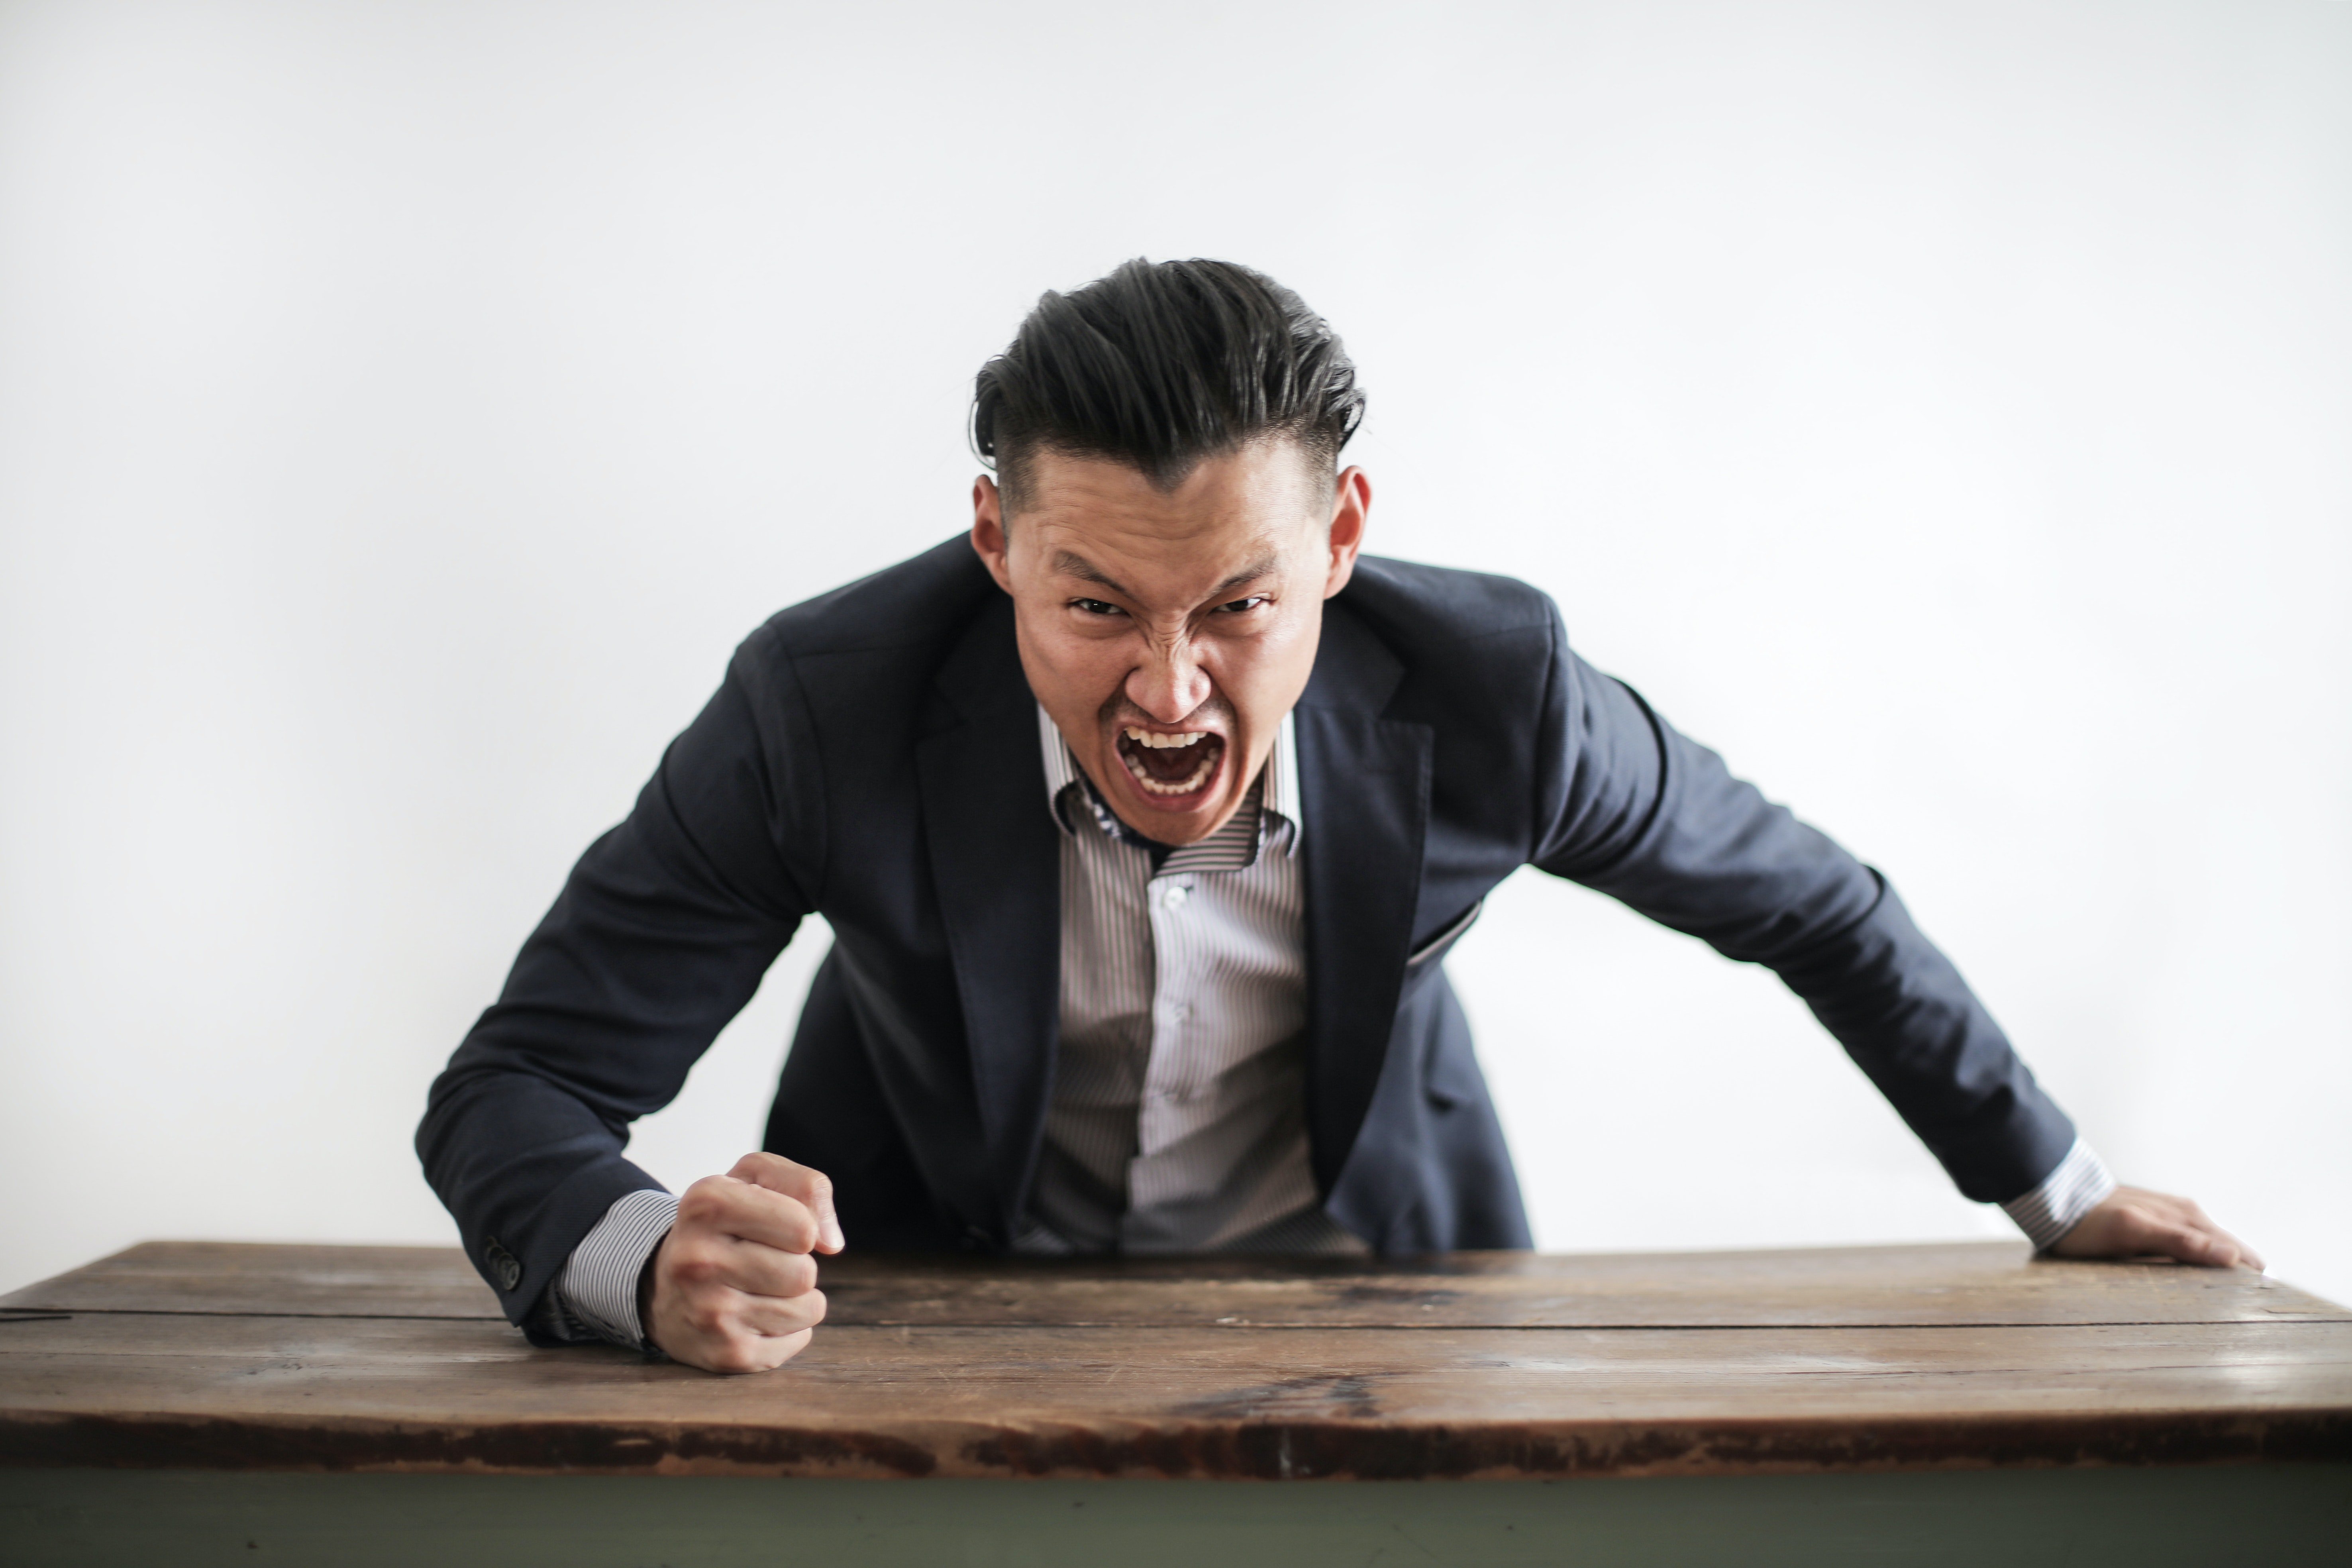 Pictured - An upset executive yelling at the camera | Source: Pexels 